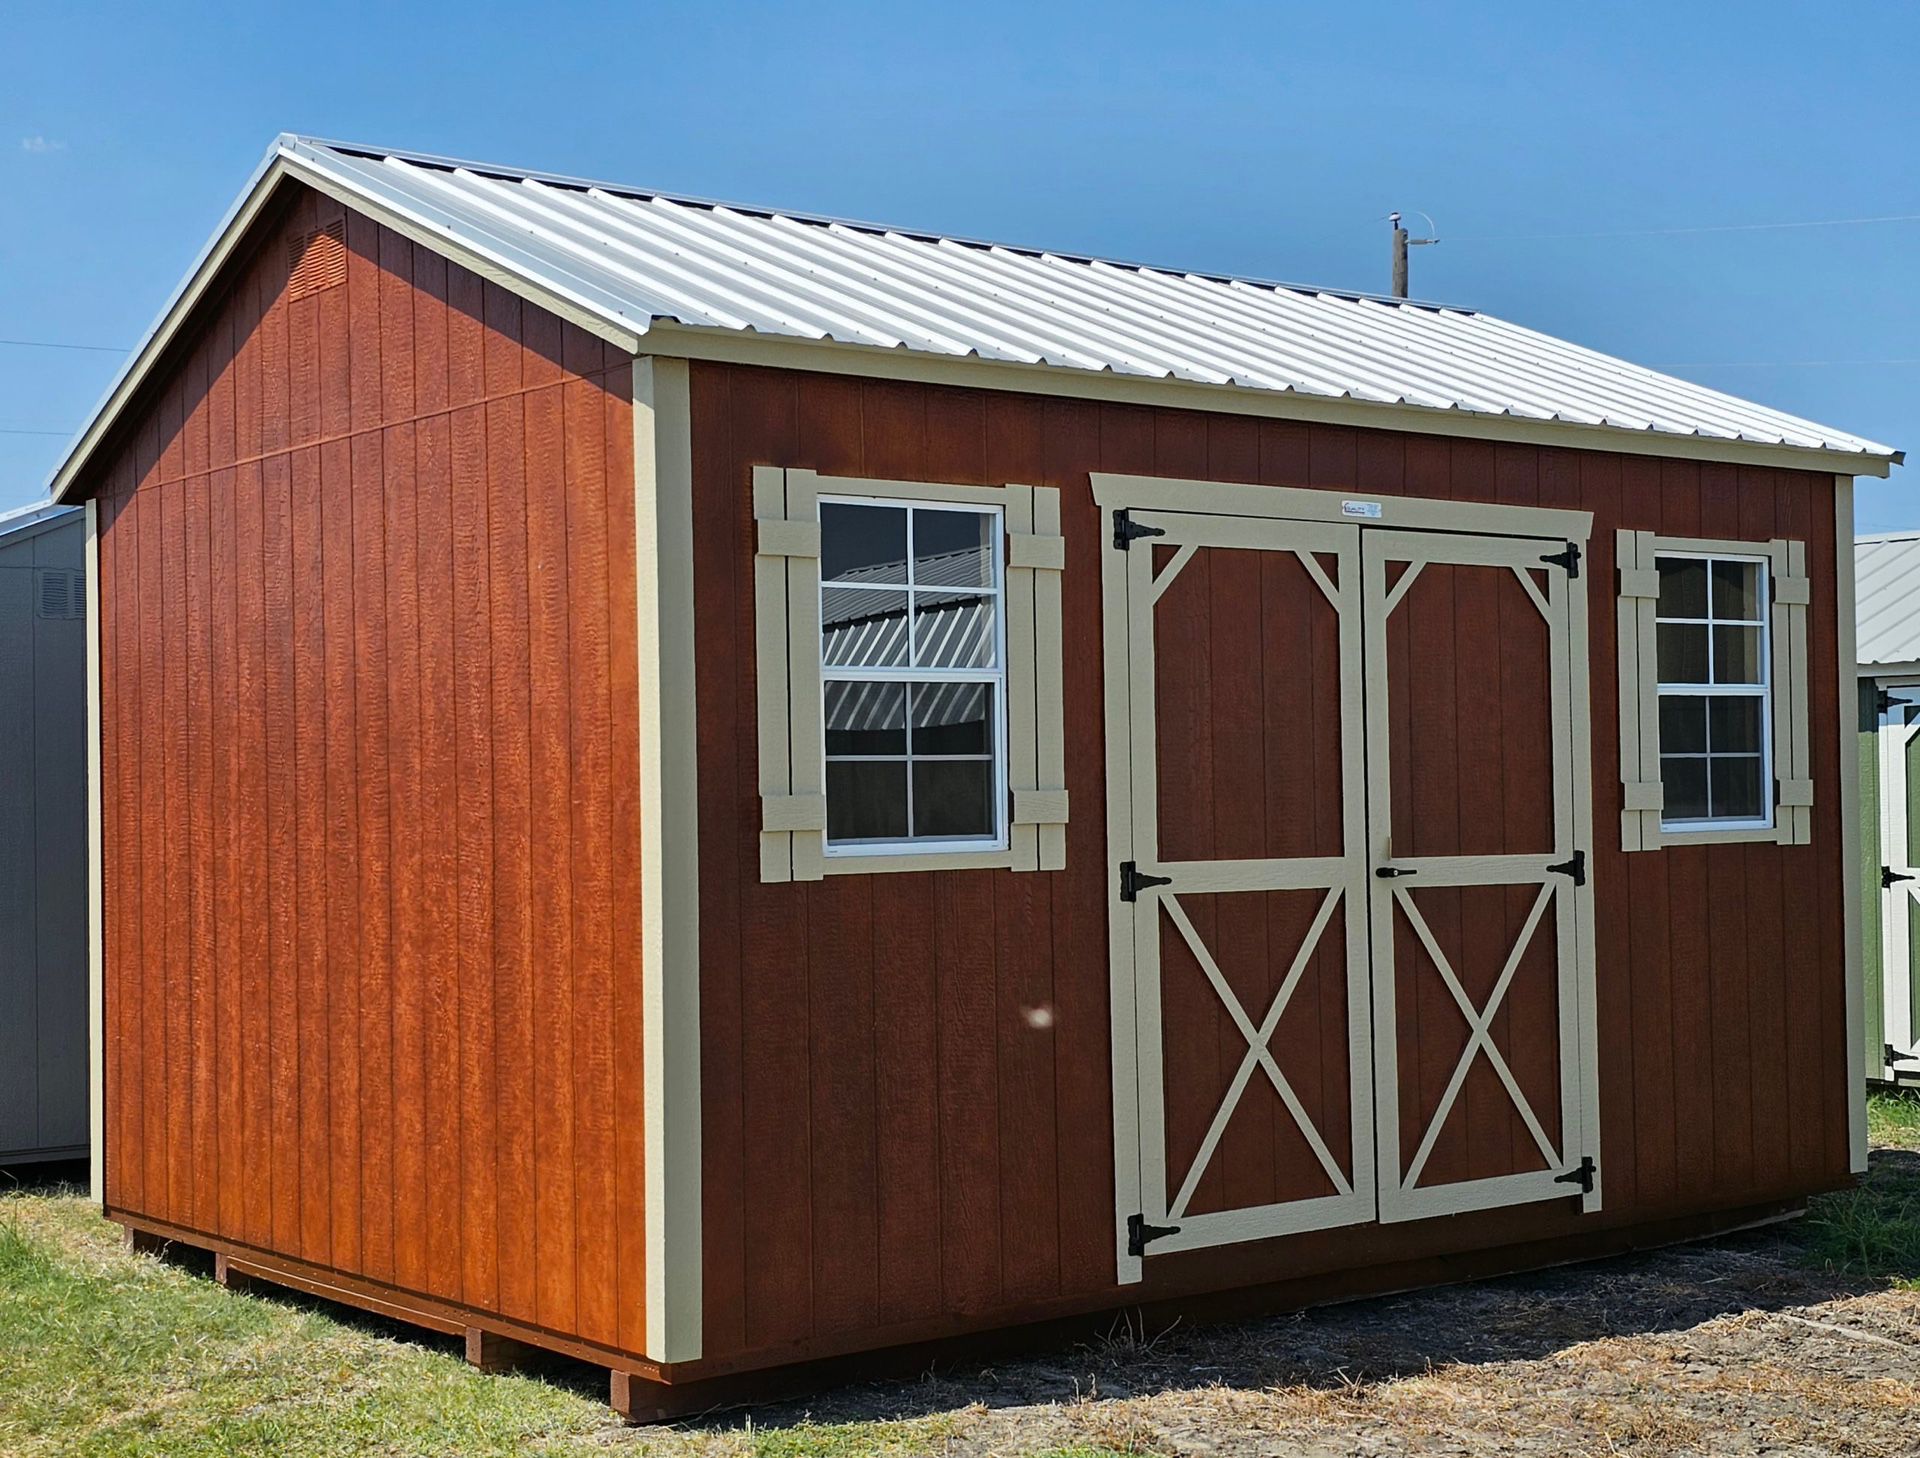 12x16 Elite Garden Shed FOR SALE - Financing Available